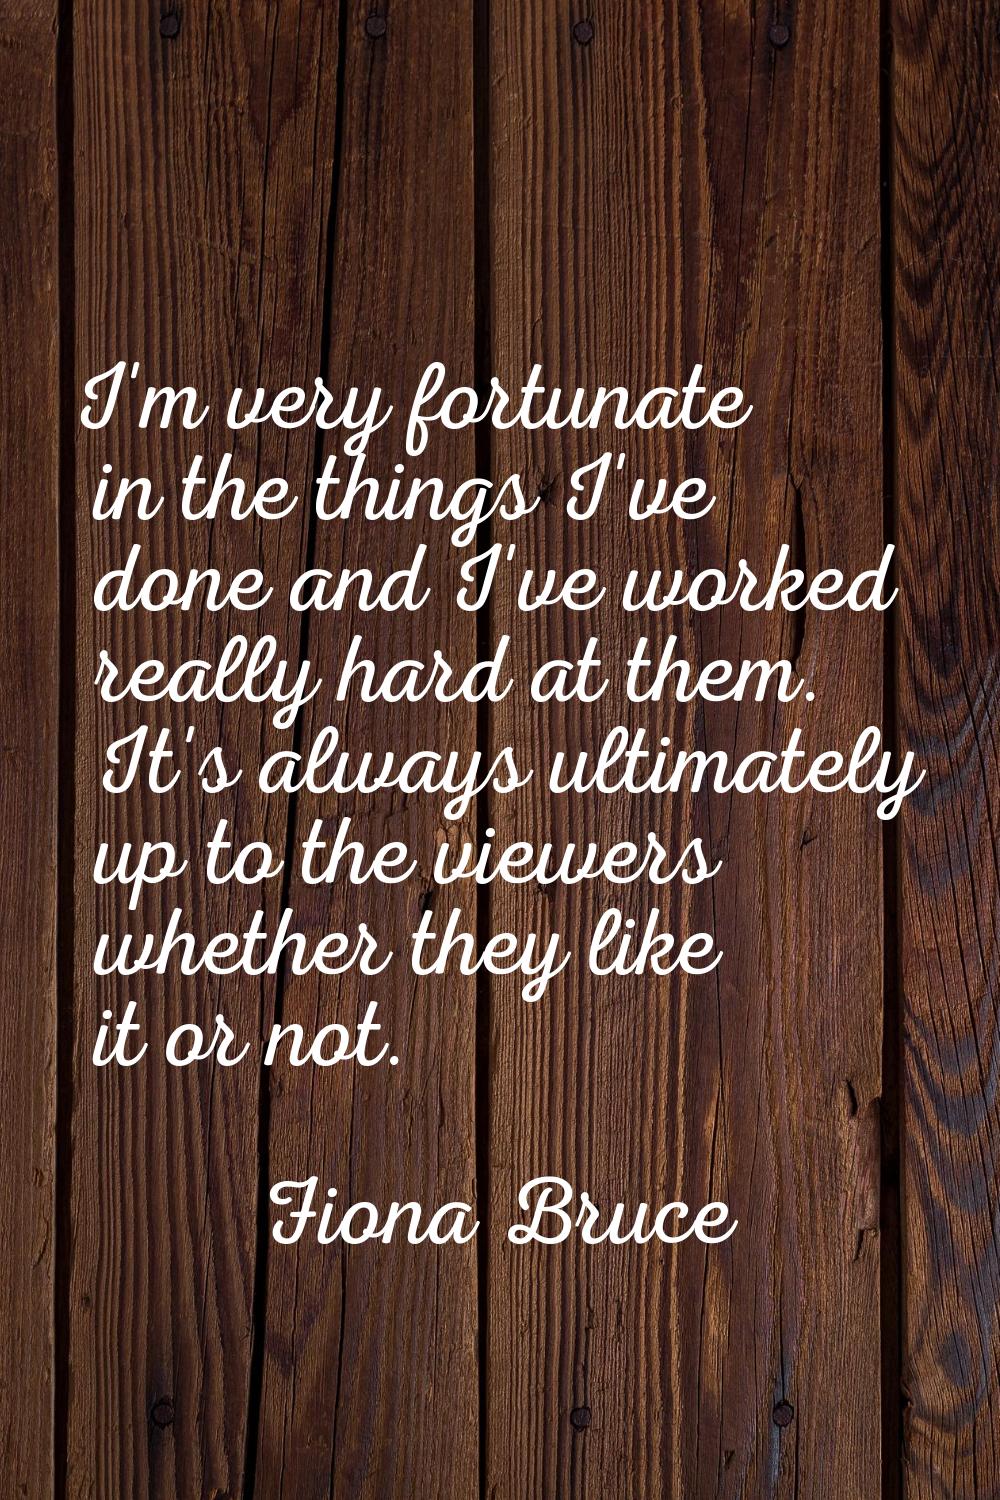 I'm very fortunate in the things I've done and I've worked really hard at them. It's always ultimat